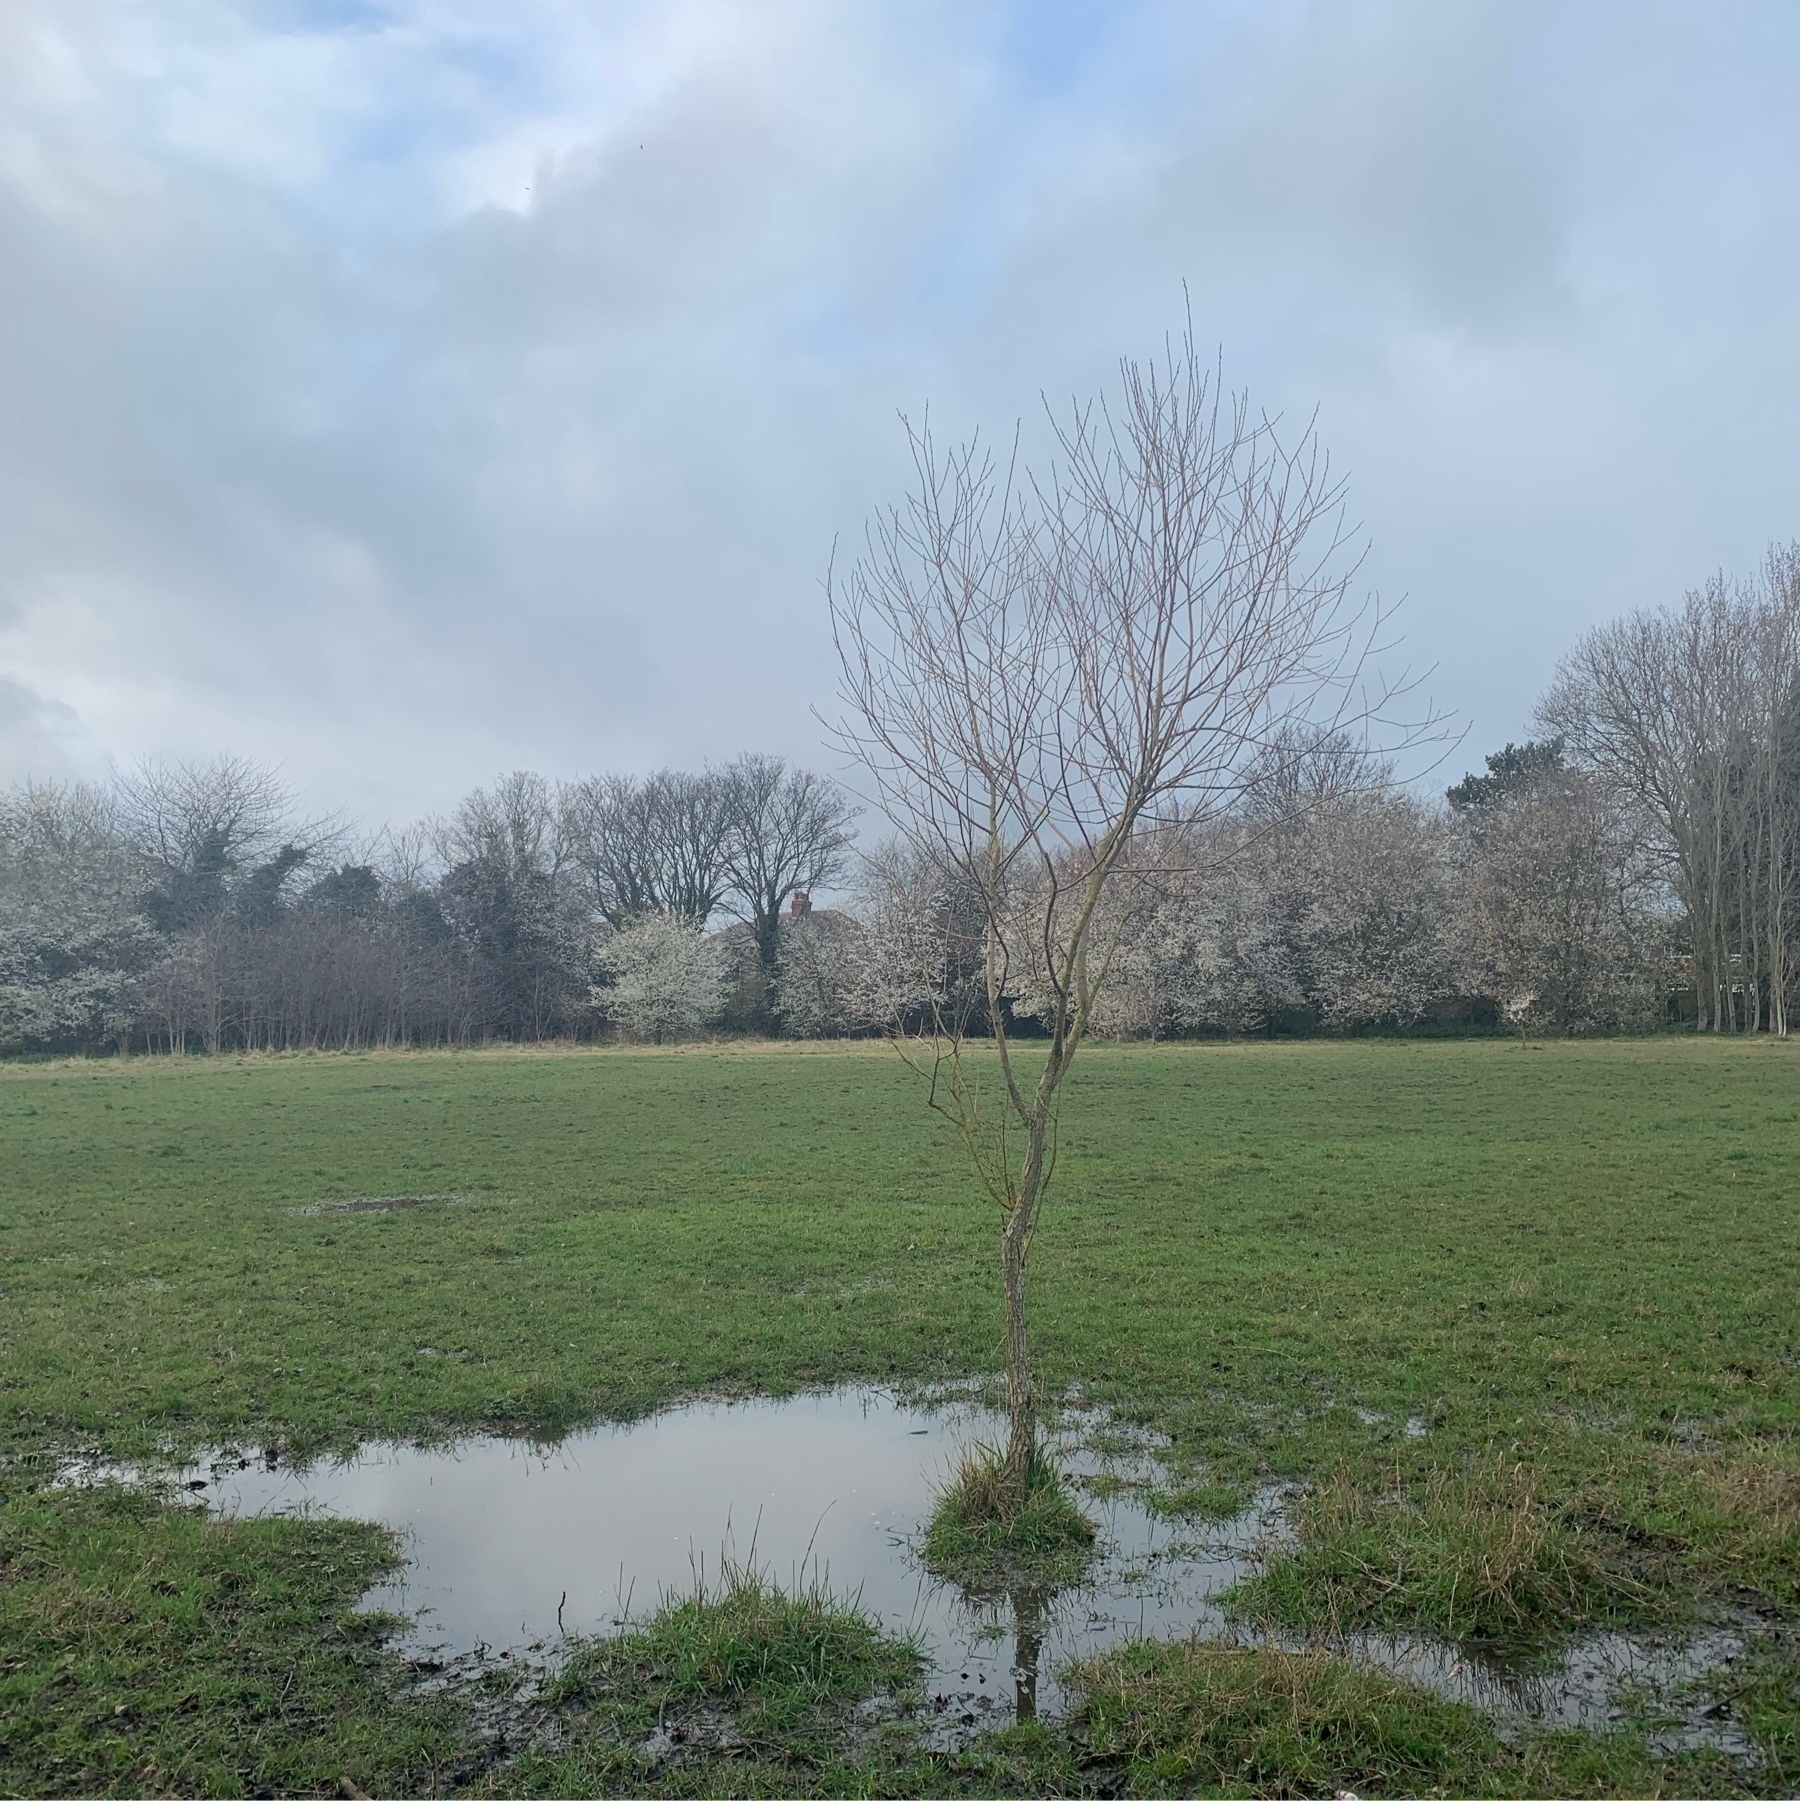 Sapling tree in foreground standing in a large puddle of water. Main treeline in the distance across an open park